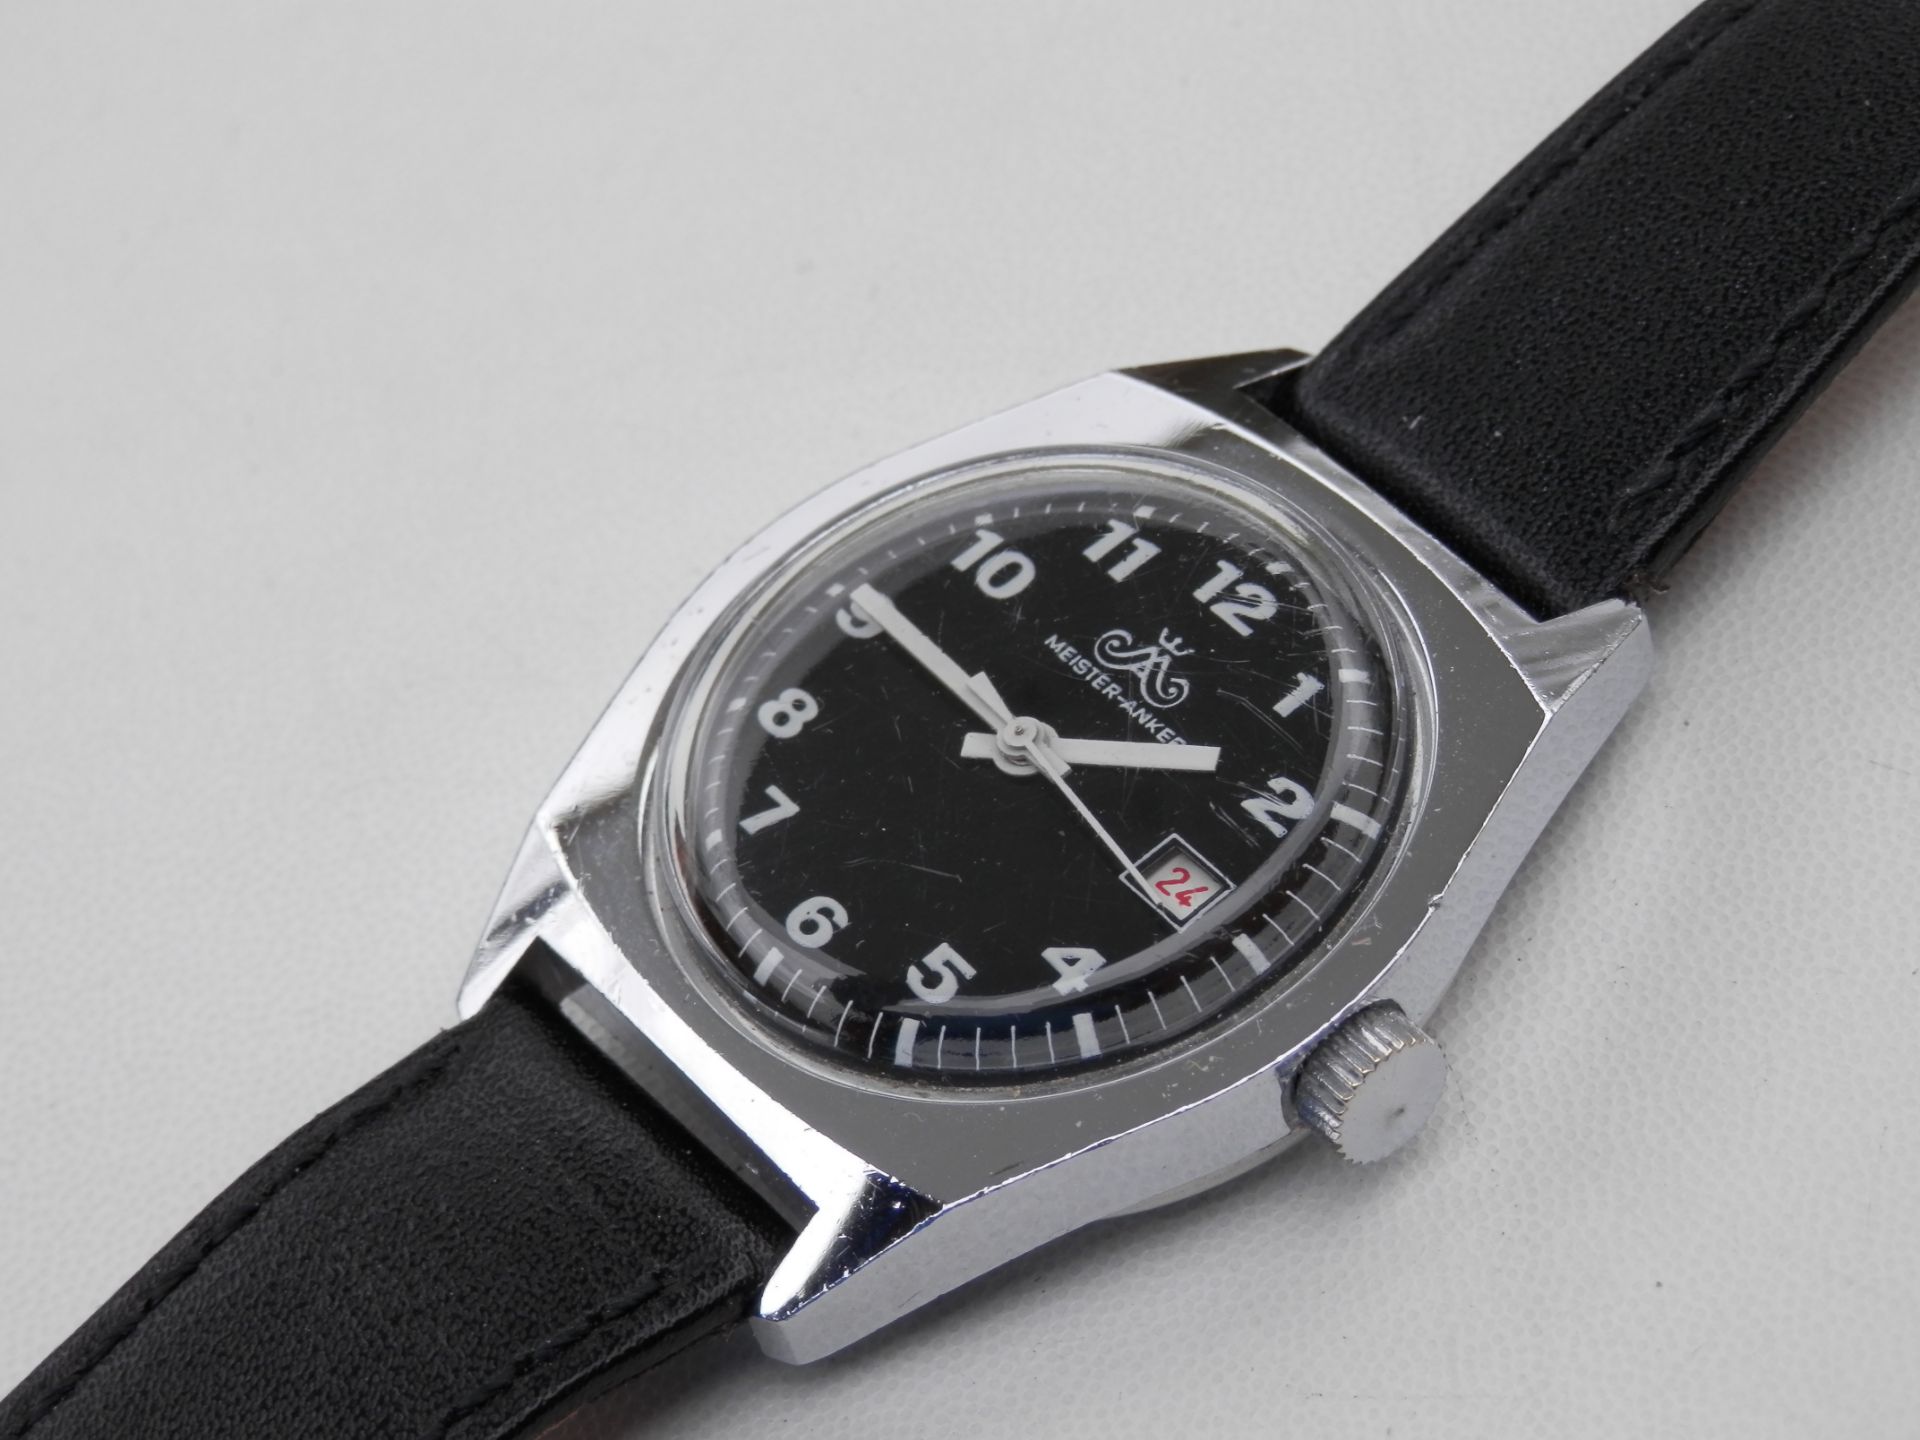 SUPERB RARE GENTS 1960S GERMAN MADE MEISTER ANKER HAND WIND DATE WATCH. - Image 9 of 10